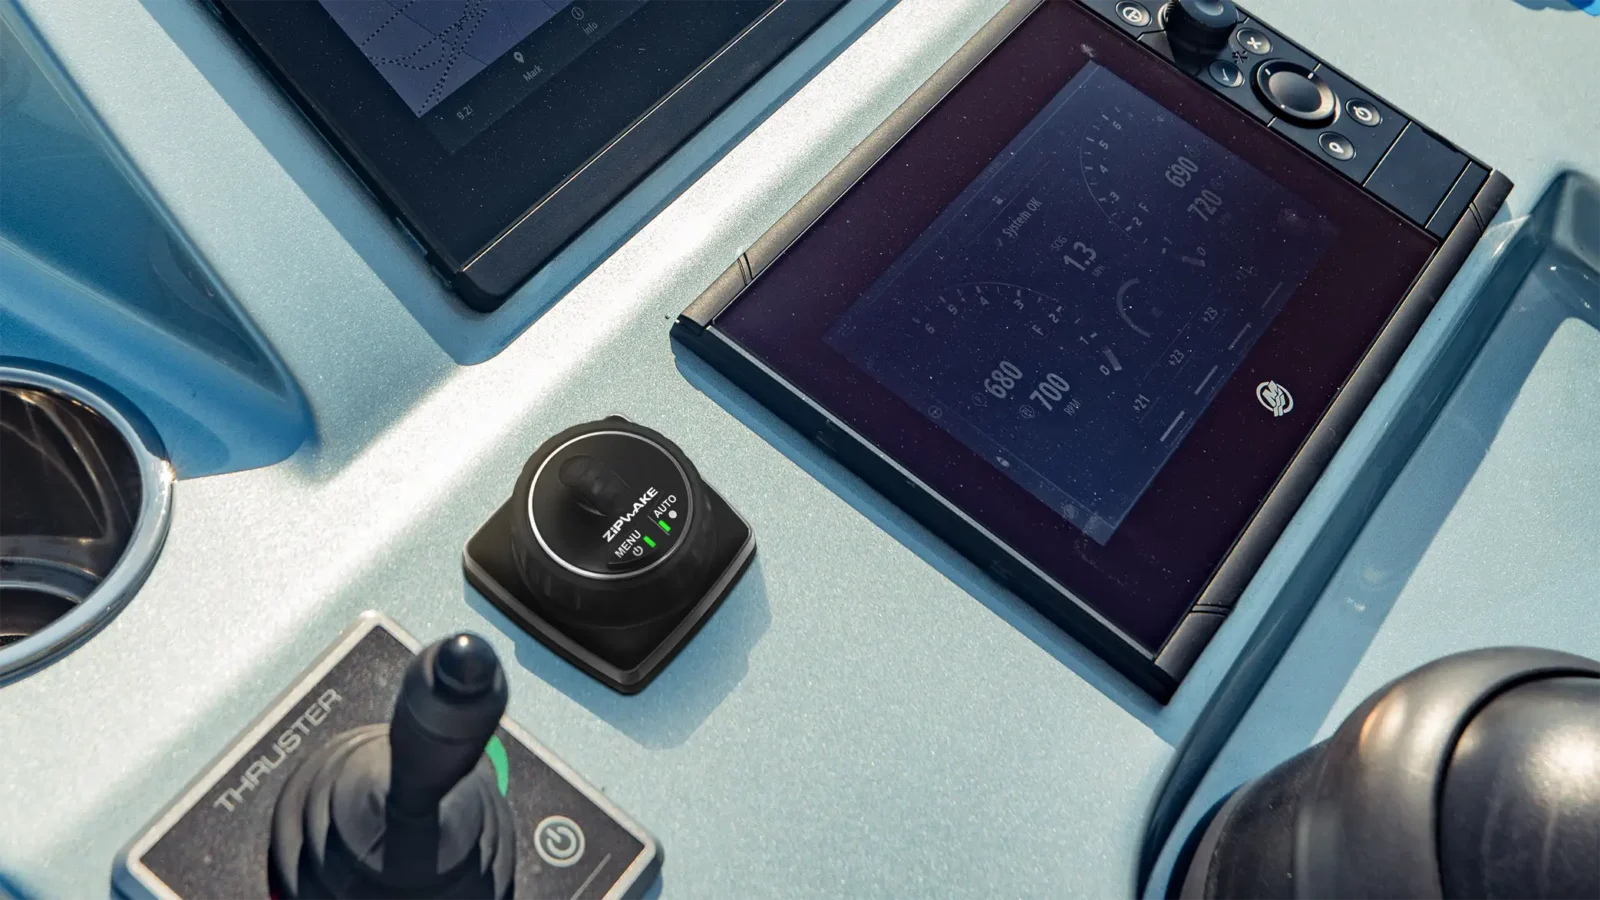 Zipwake Mini Controller when it's installed on a boat.